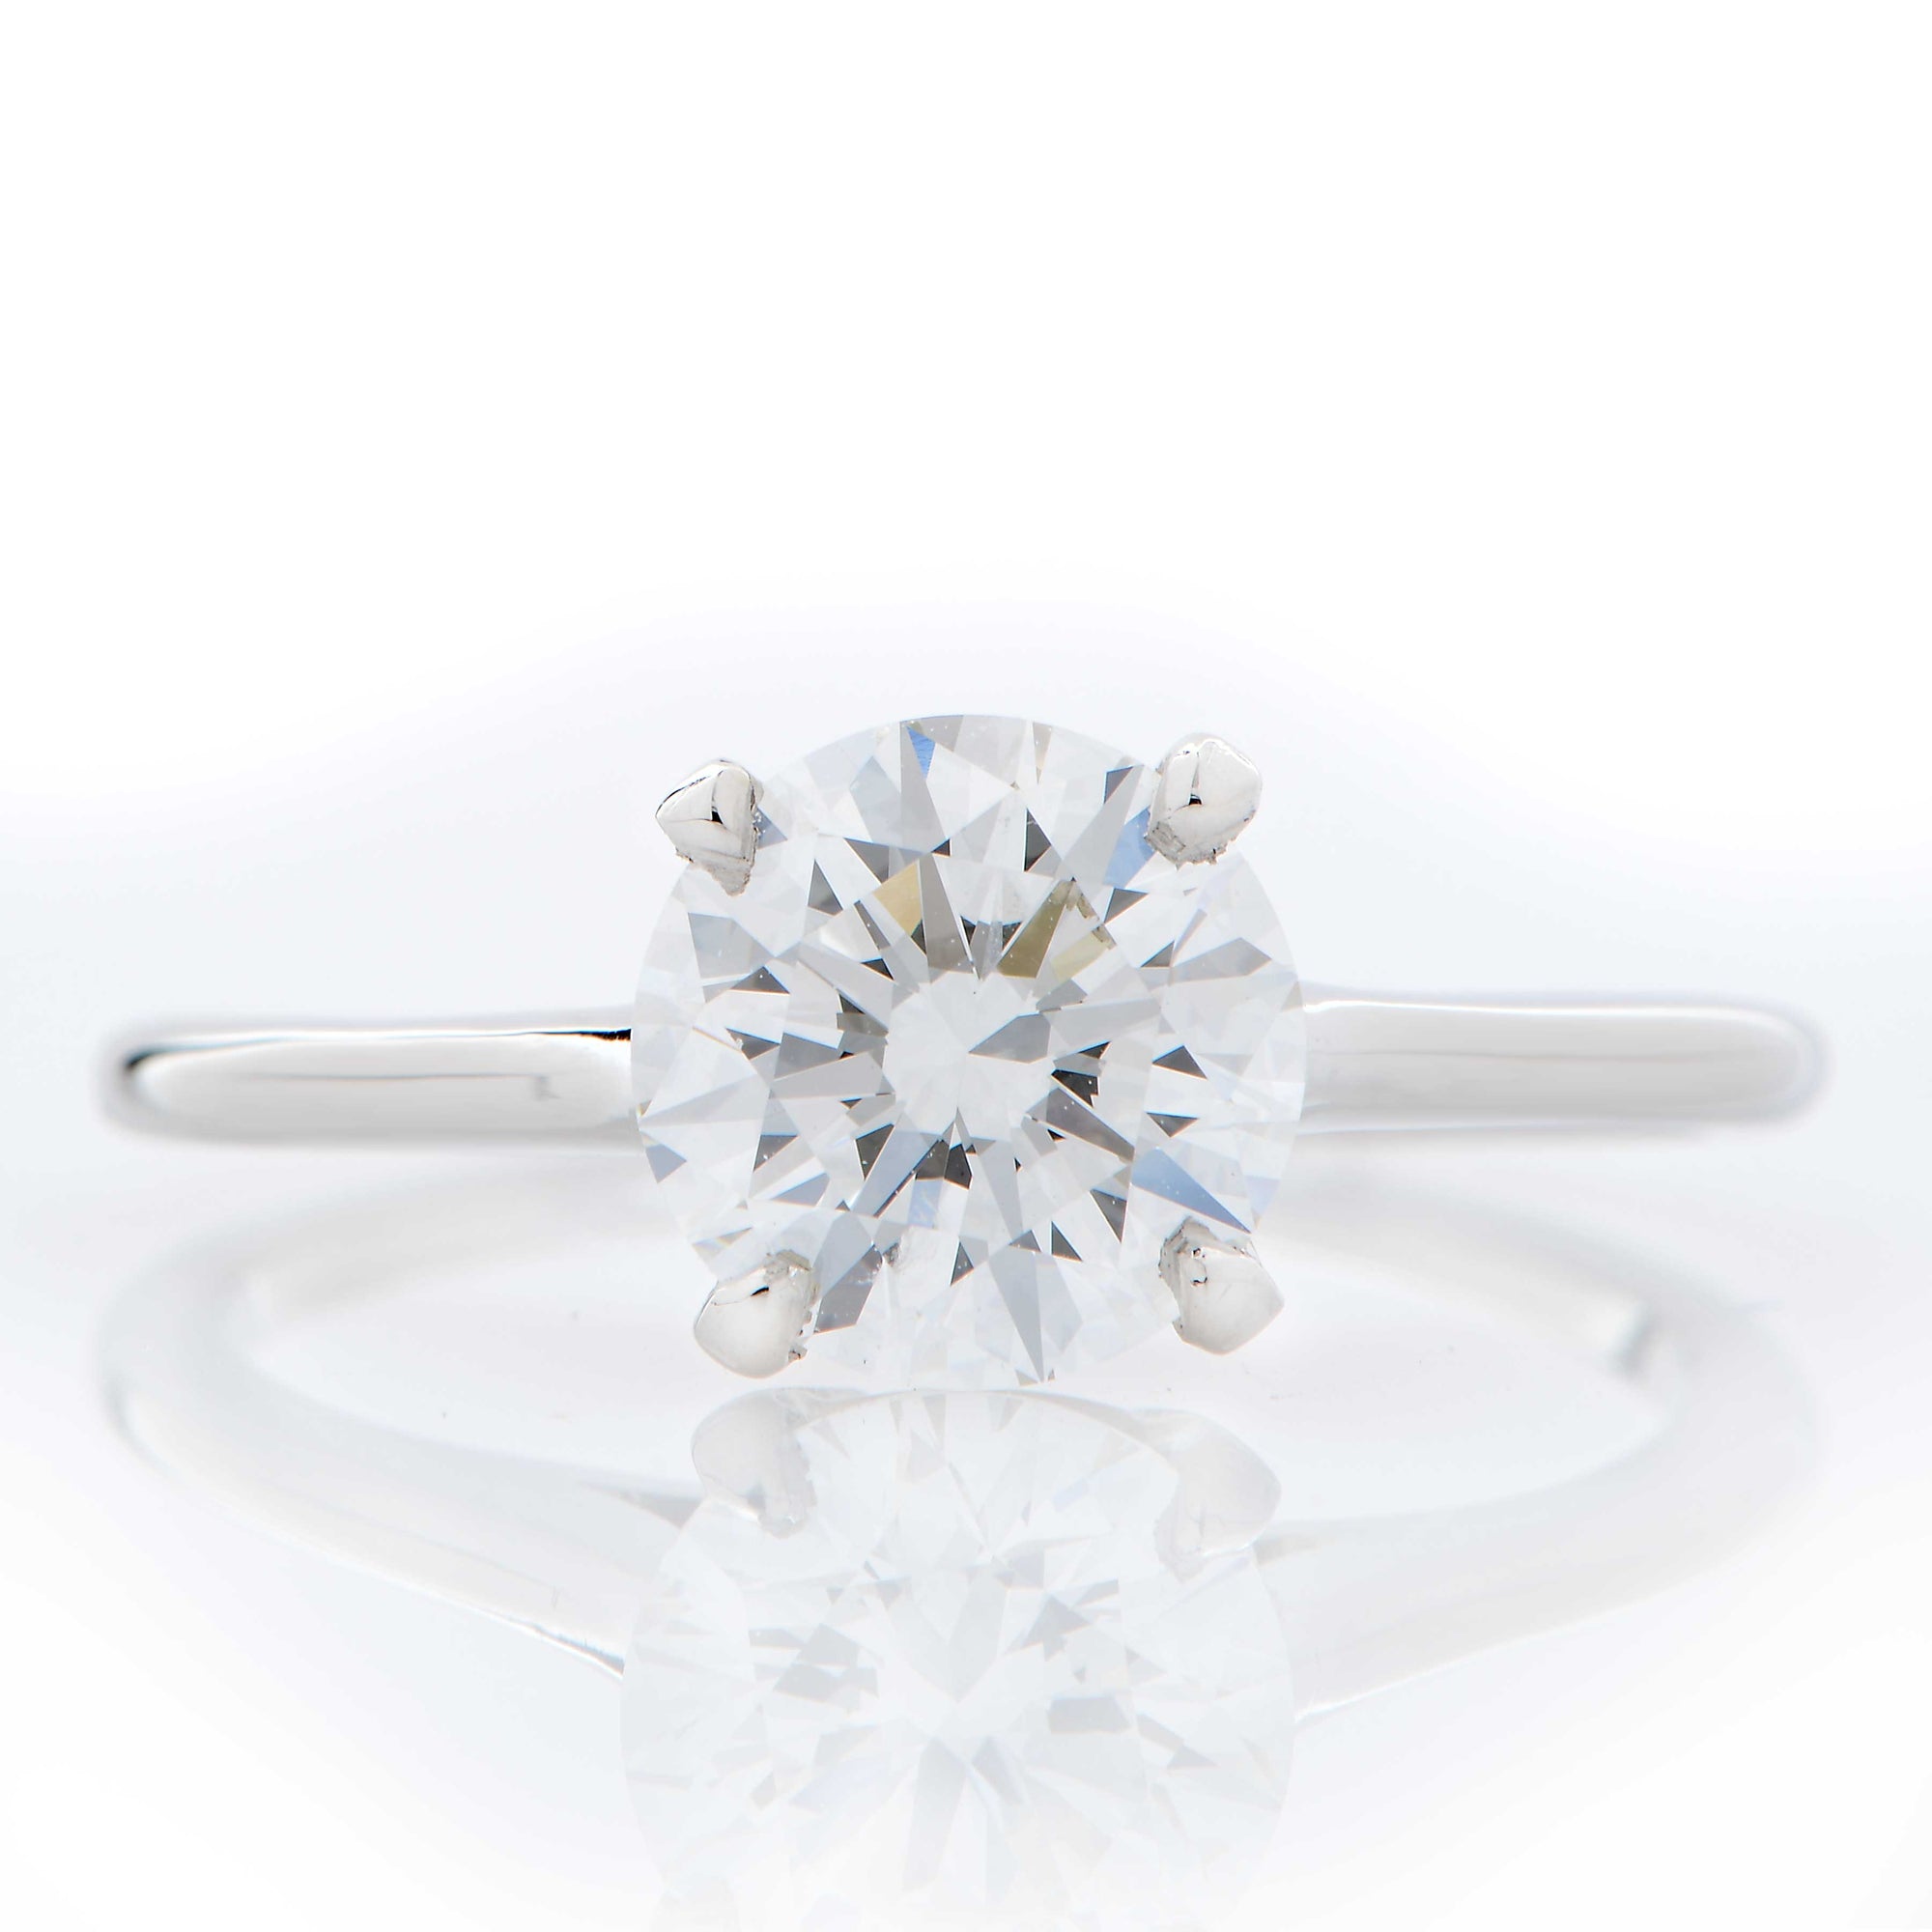 Choosing a diamond for your engagement ring. Shapes